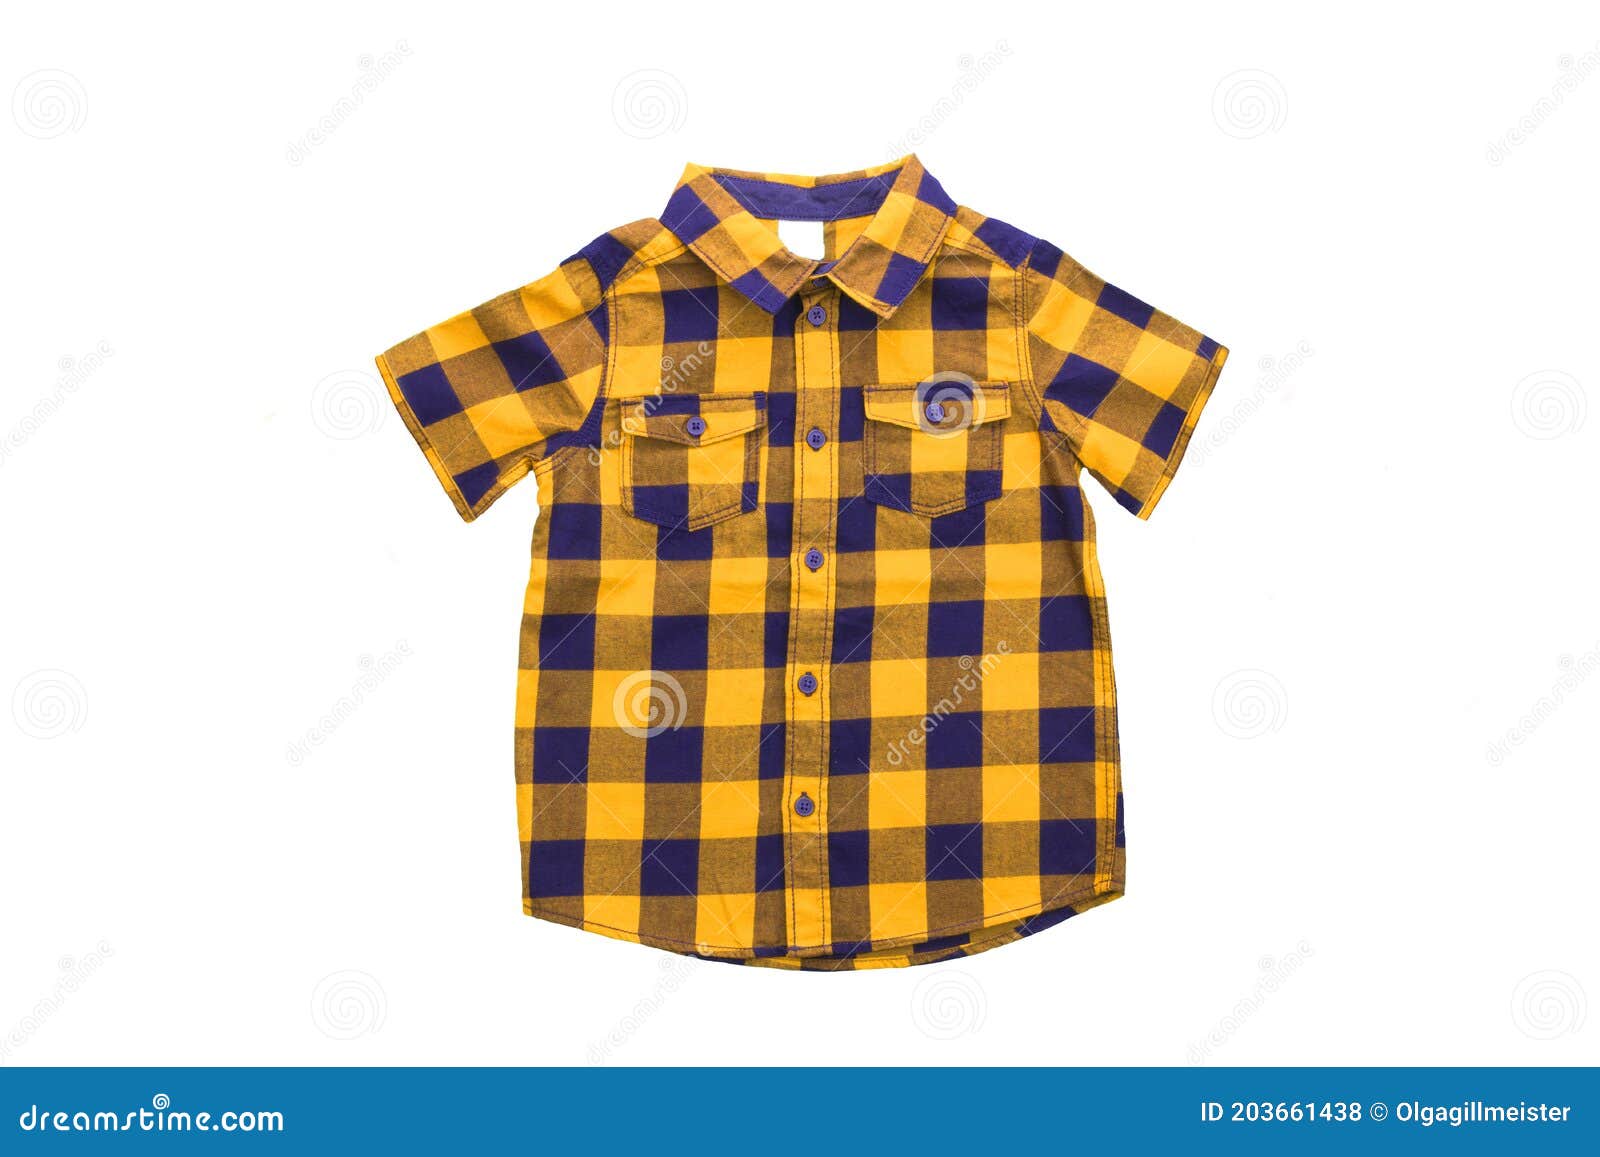 Children Clothes. Fashionable Yellow Blue Plaid Shirt with Short ...